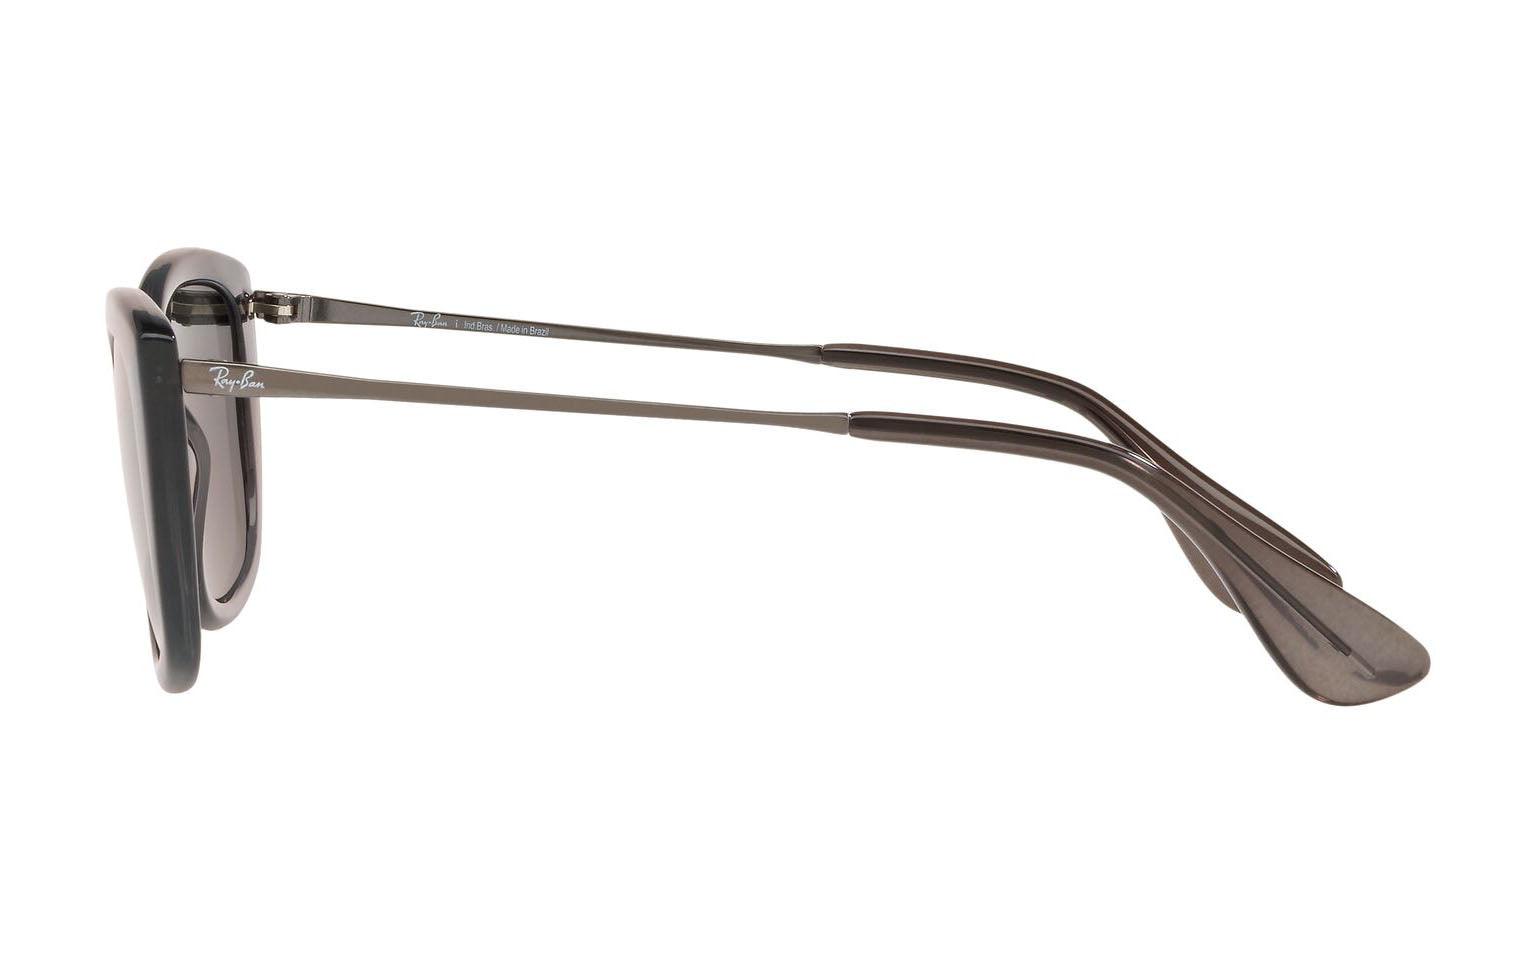 RAY-BAN 4327L 60687 - Opticas Lookout